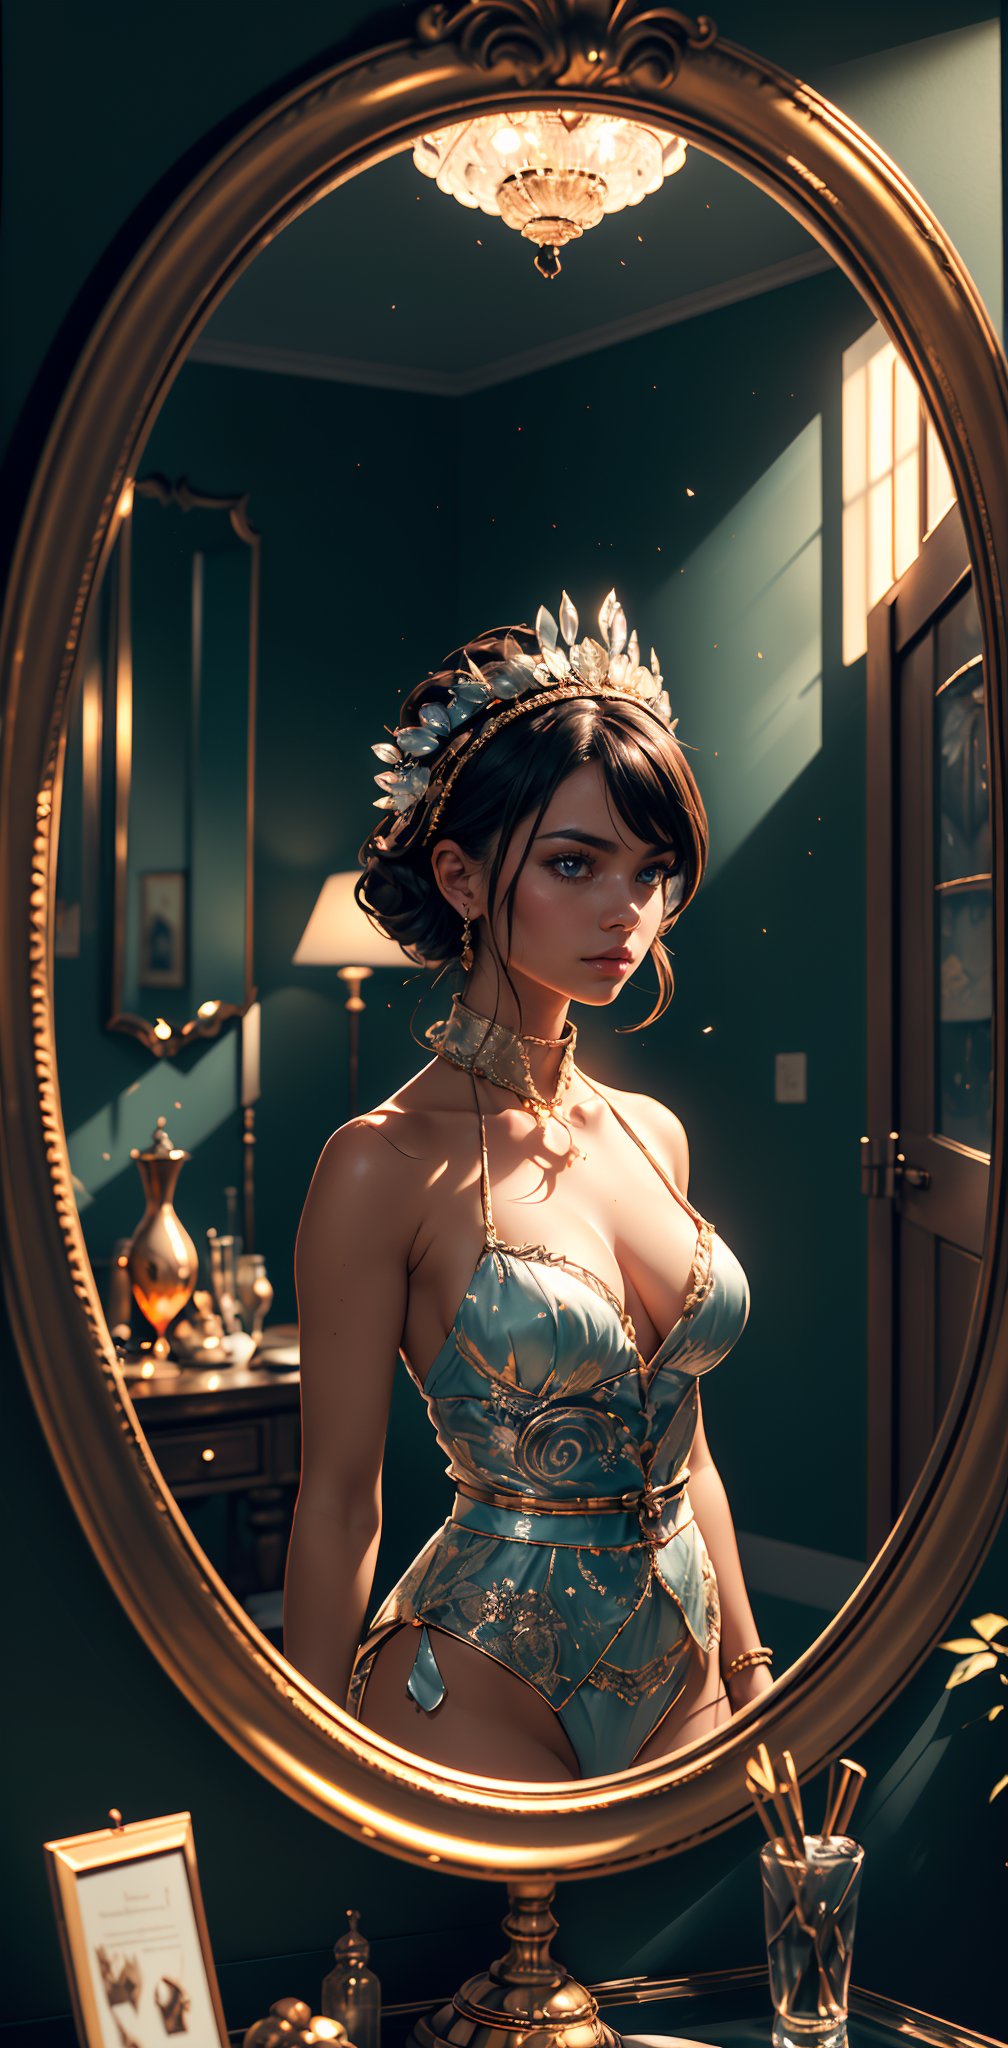 (ultra realistic,32k, masterpiece:1.2),(high detailed skin:1.1),( high quality:1.1), (masterpiece, best quality), best quality, masterpiece, photorealistic, ultrarealistic, professional photograph shot on Canon EOS R6, More detail,)
(masterpiece:1.2), (A woman with a clockwork heart wanders through a labyrinth of mirrors, her reflection multiplying into an endless array of possibilities, she searches for the true version of herself, maze of shimmering glass, Style is Surreal and introspective with a focus on the search for identity and meaning, Lighting is Low-key and atmospheric with the mirrors reflecting fragments of light and shadow, wearing unique Avant-garde masterpiece attire and headdress:1.1), (art by Gainax:1.4), (hyperdetailed:1.1), (intricate details:1.0), (Refined details:1.1), (best quality:1.1), (high resolution:1.2)